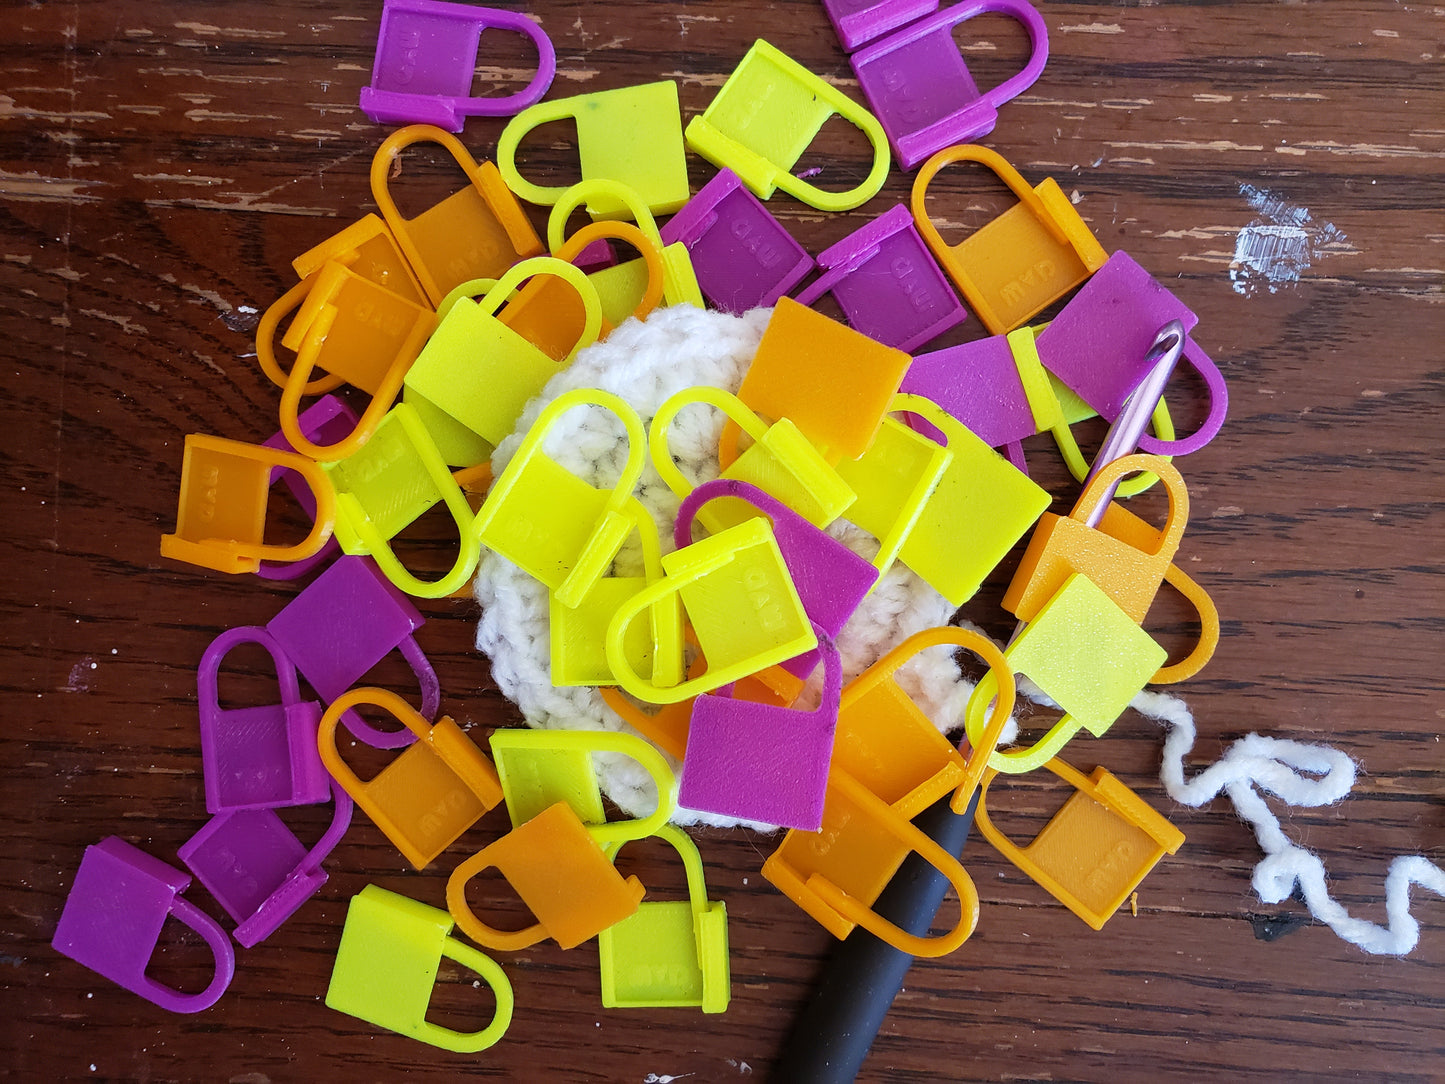 Locking Yarn Stitch Markers - Sets of 25 - 3D Printed Plastic Resin - Crochet Knit Gift